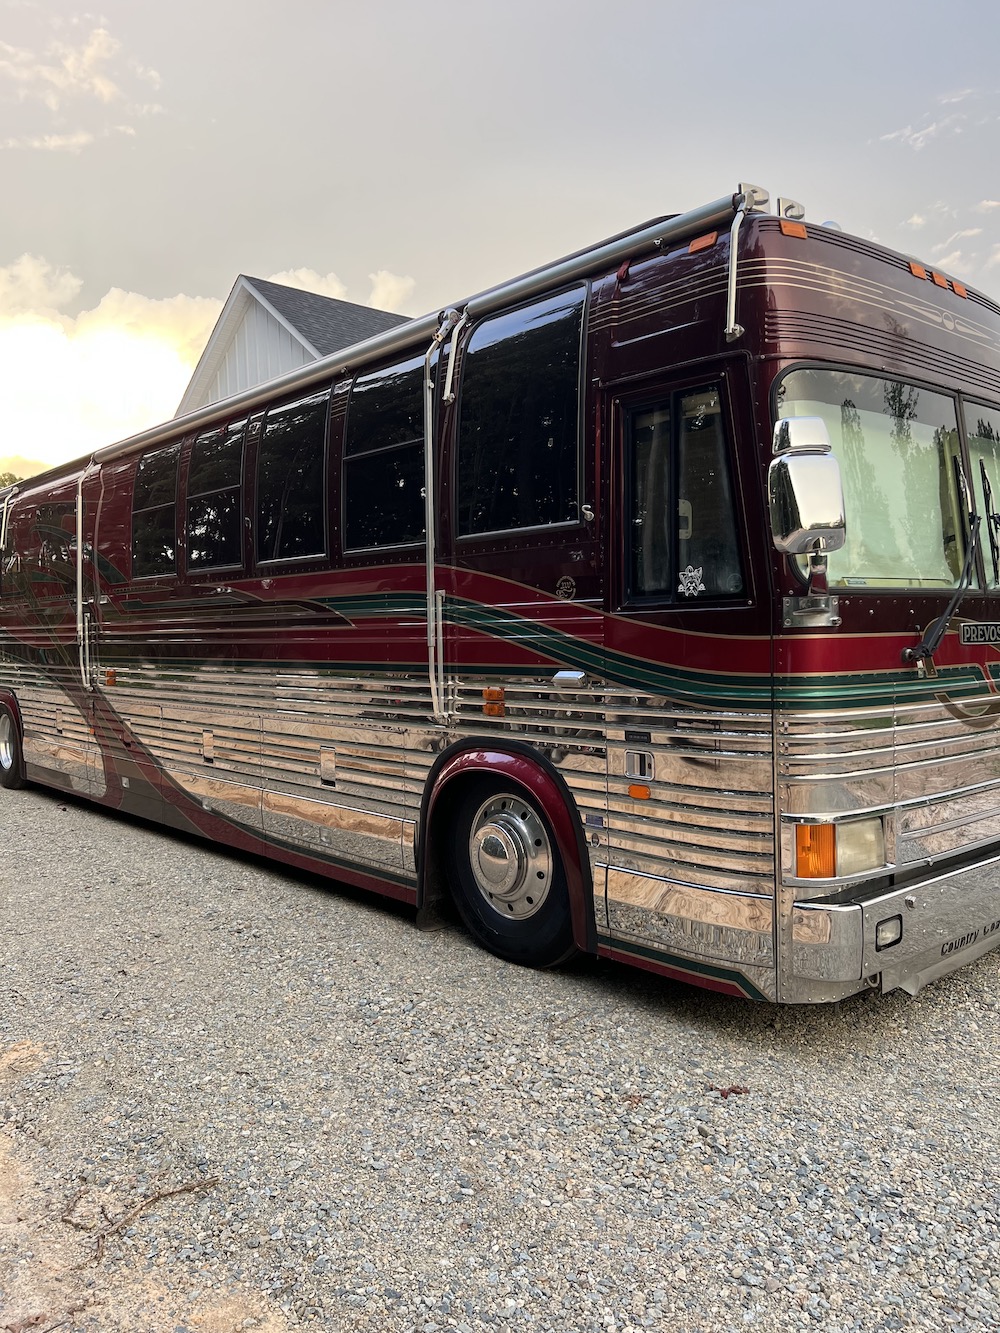 2001 Prevost Country Coach XL For Sale